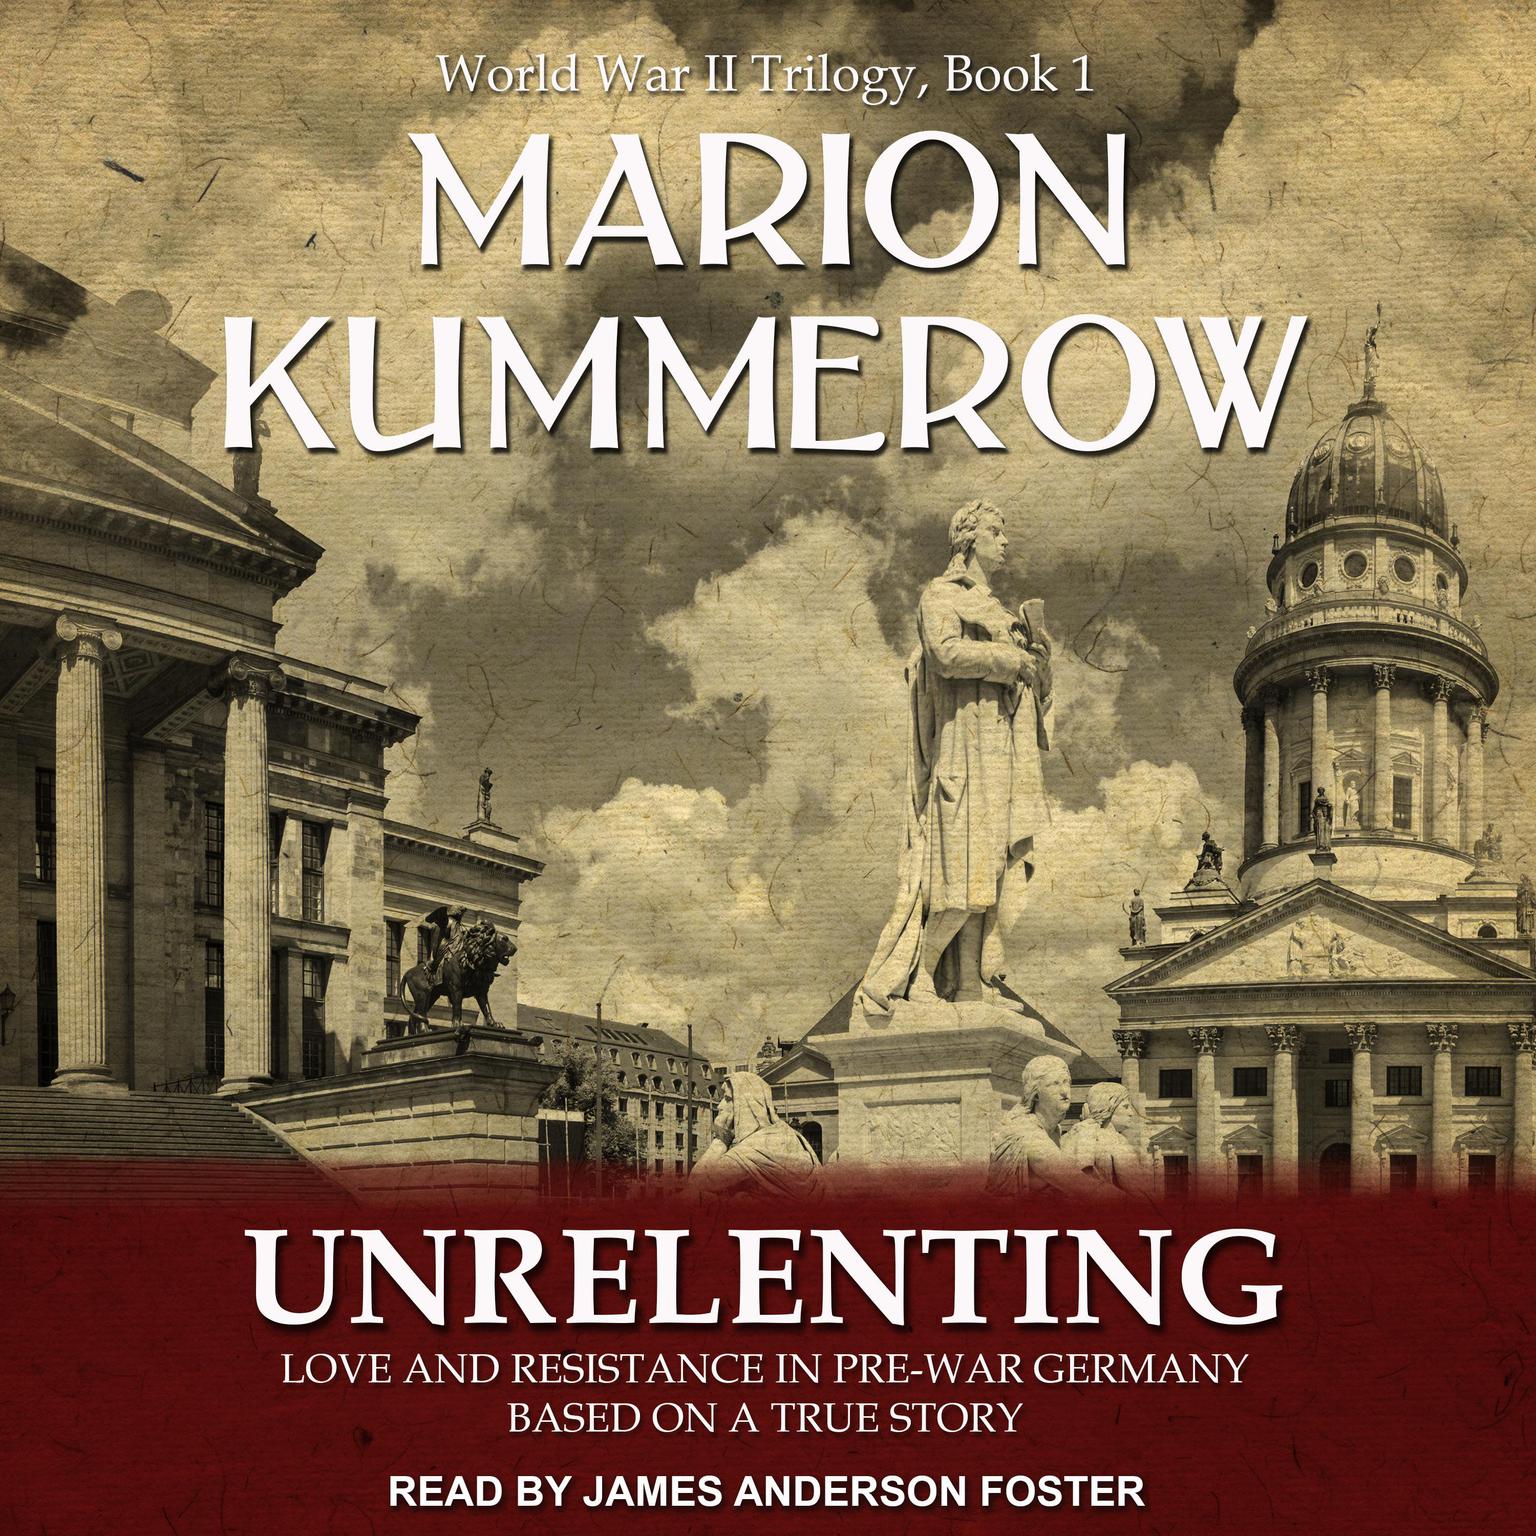 Unrelenting: Love and Resistance in Pre-War Germany Audiobook, by Marion Kummerow